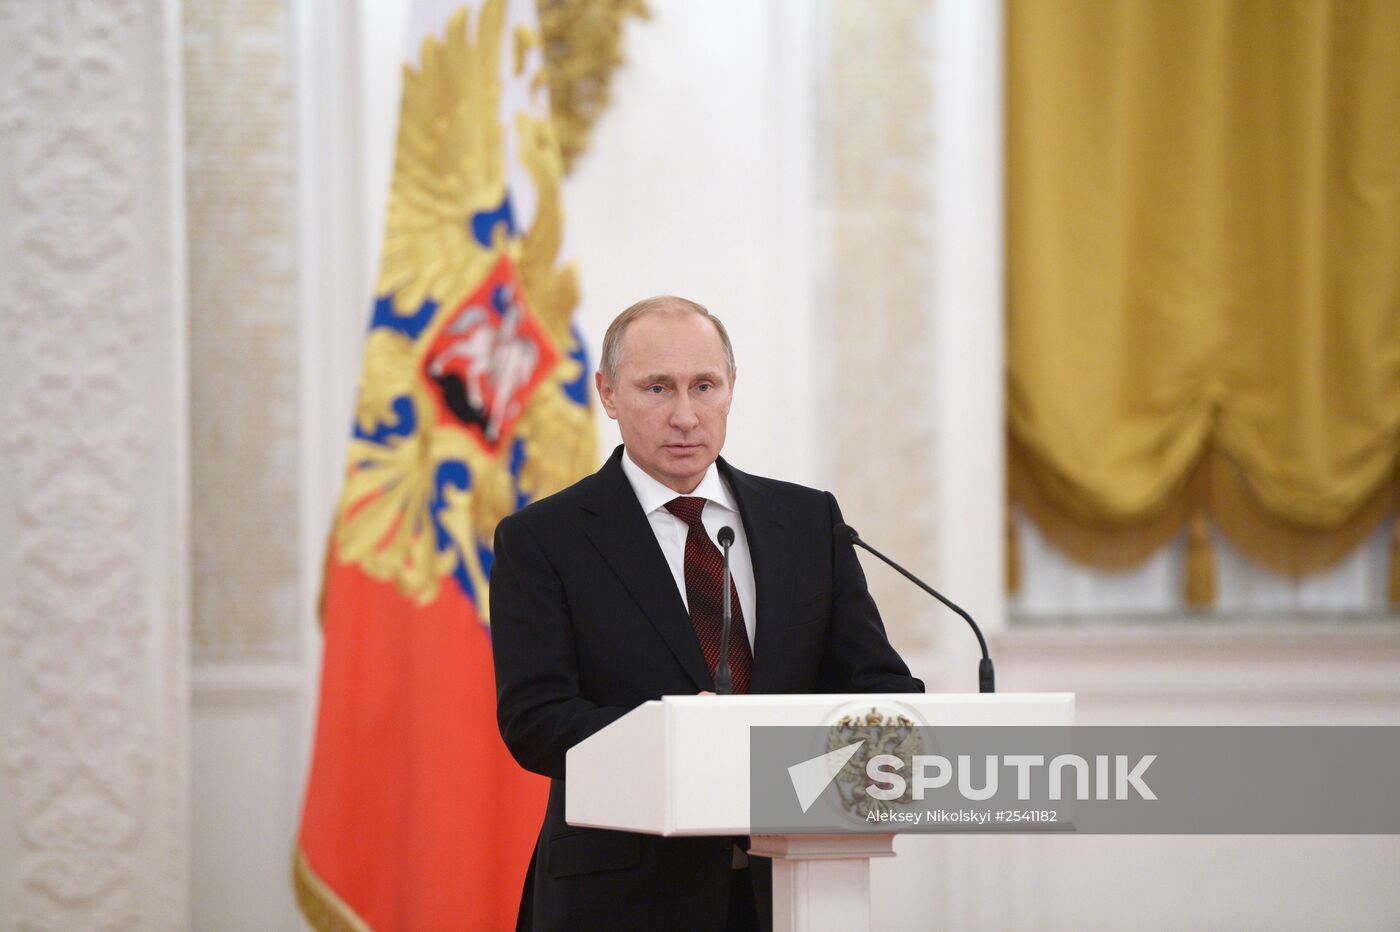 Vladimir Putin at ceremonial reception marking Heroes of the Fatherland Day